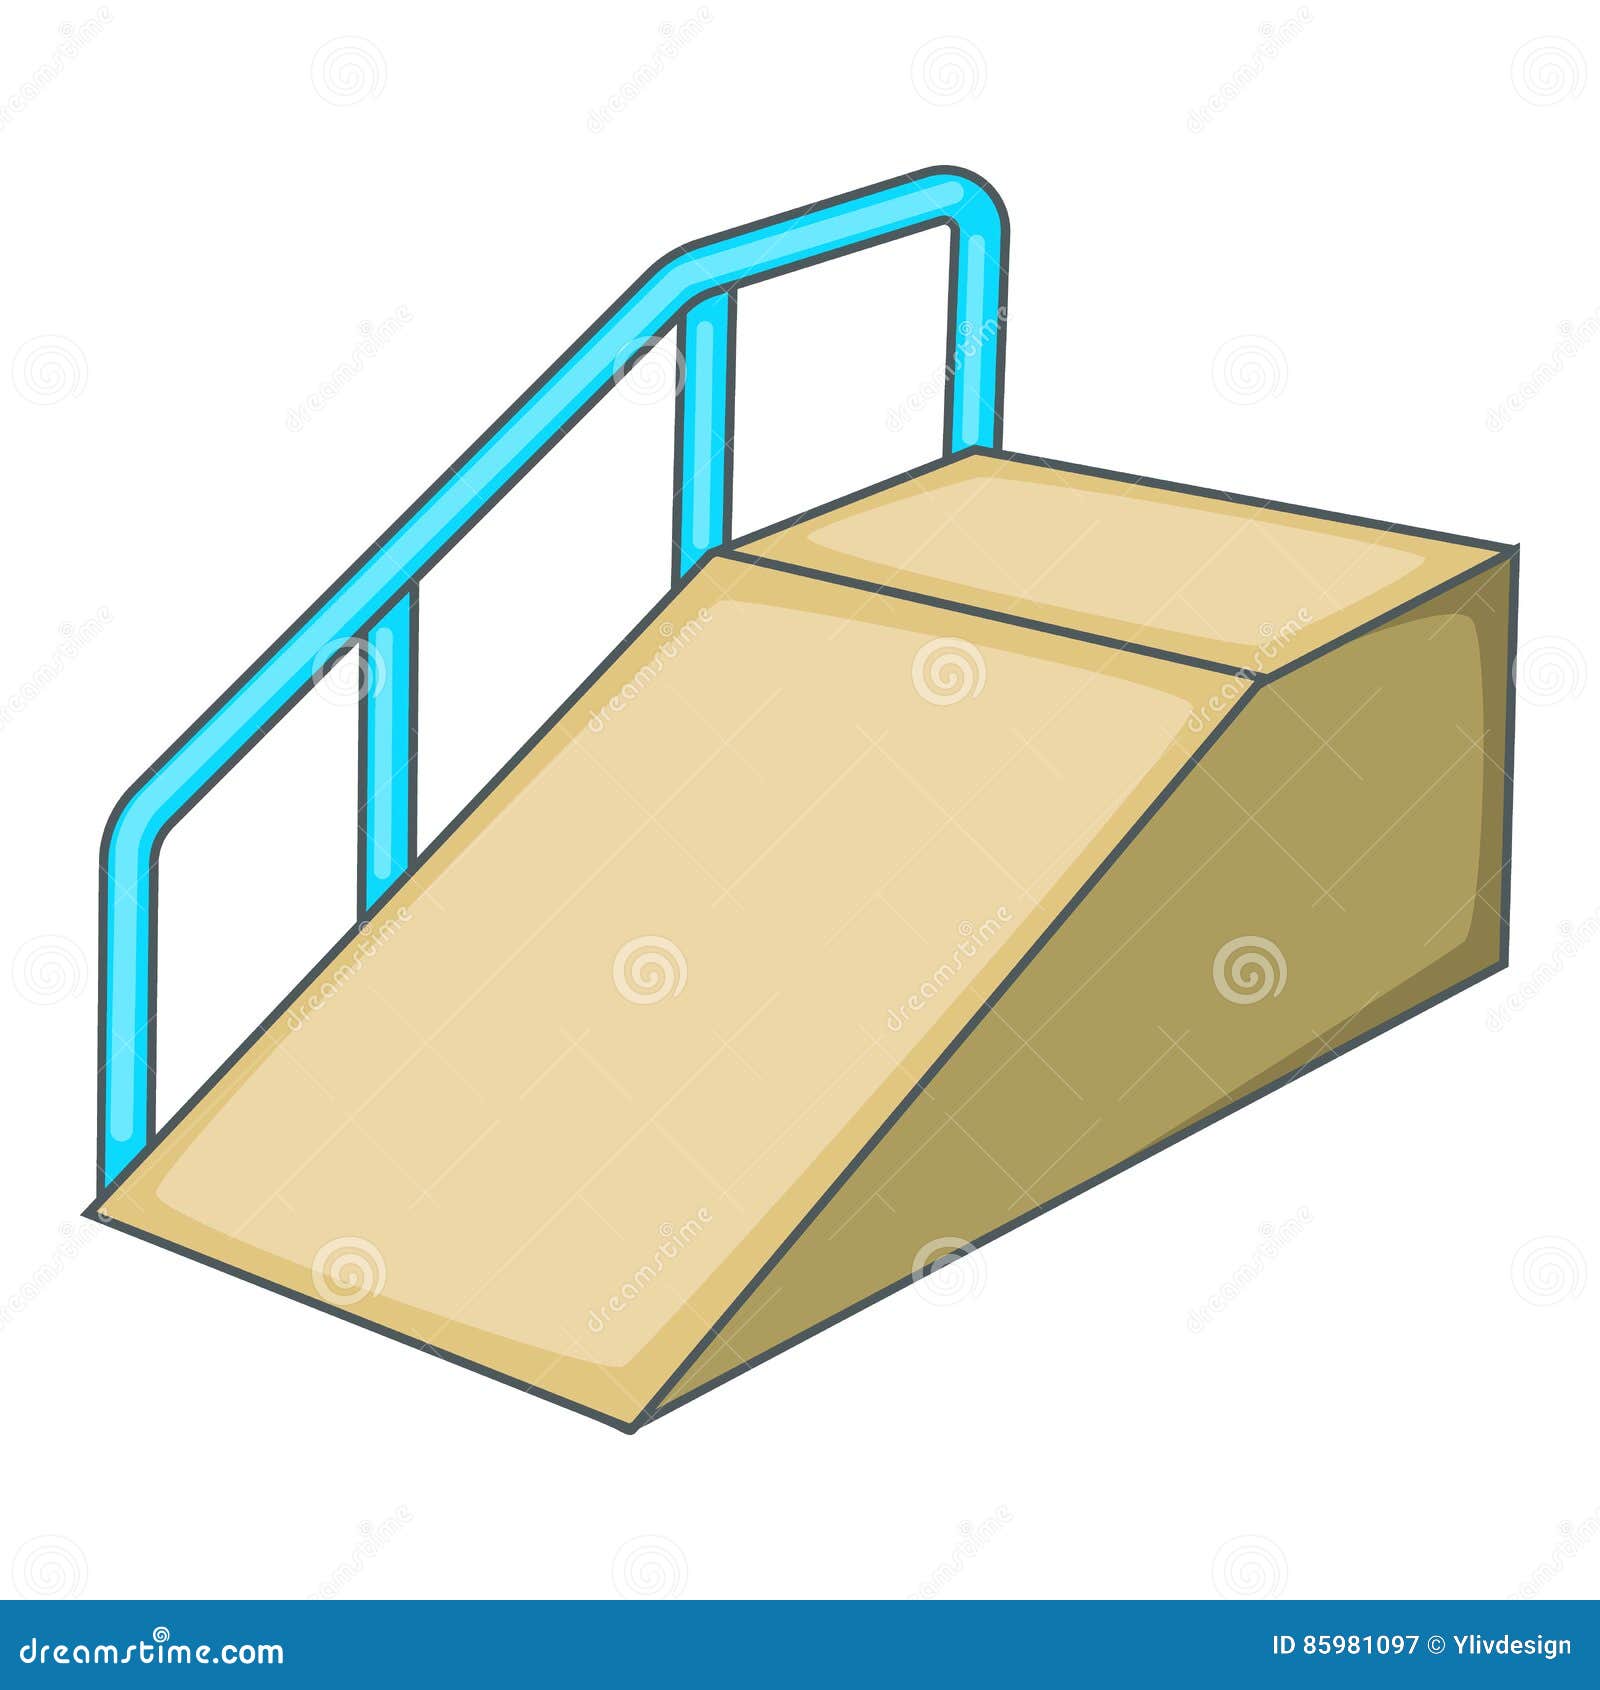 ramp for the disabled icon, cartoon style